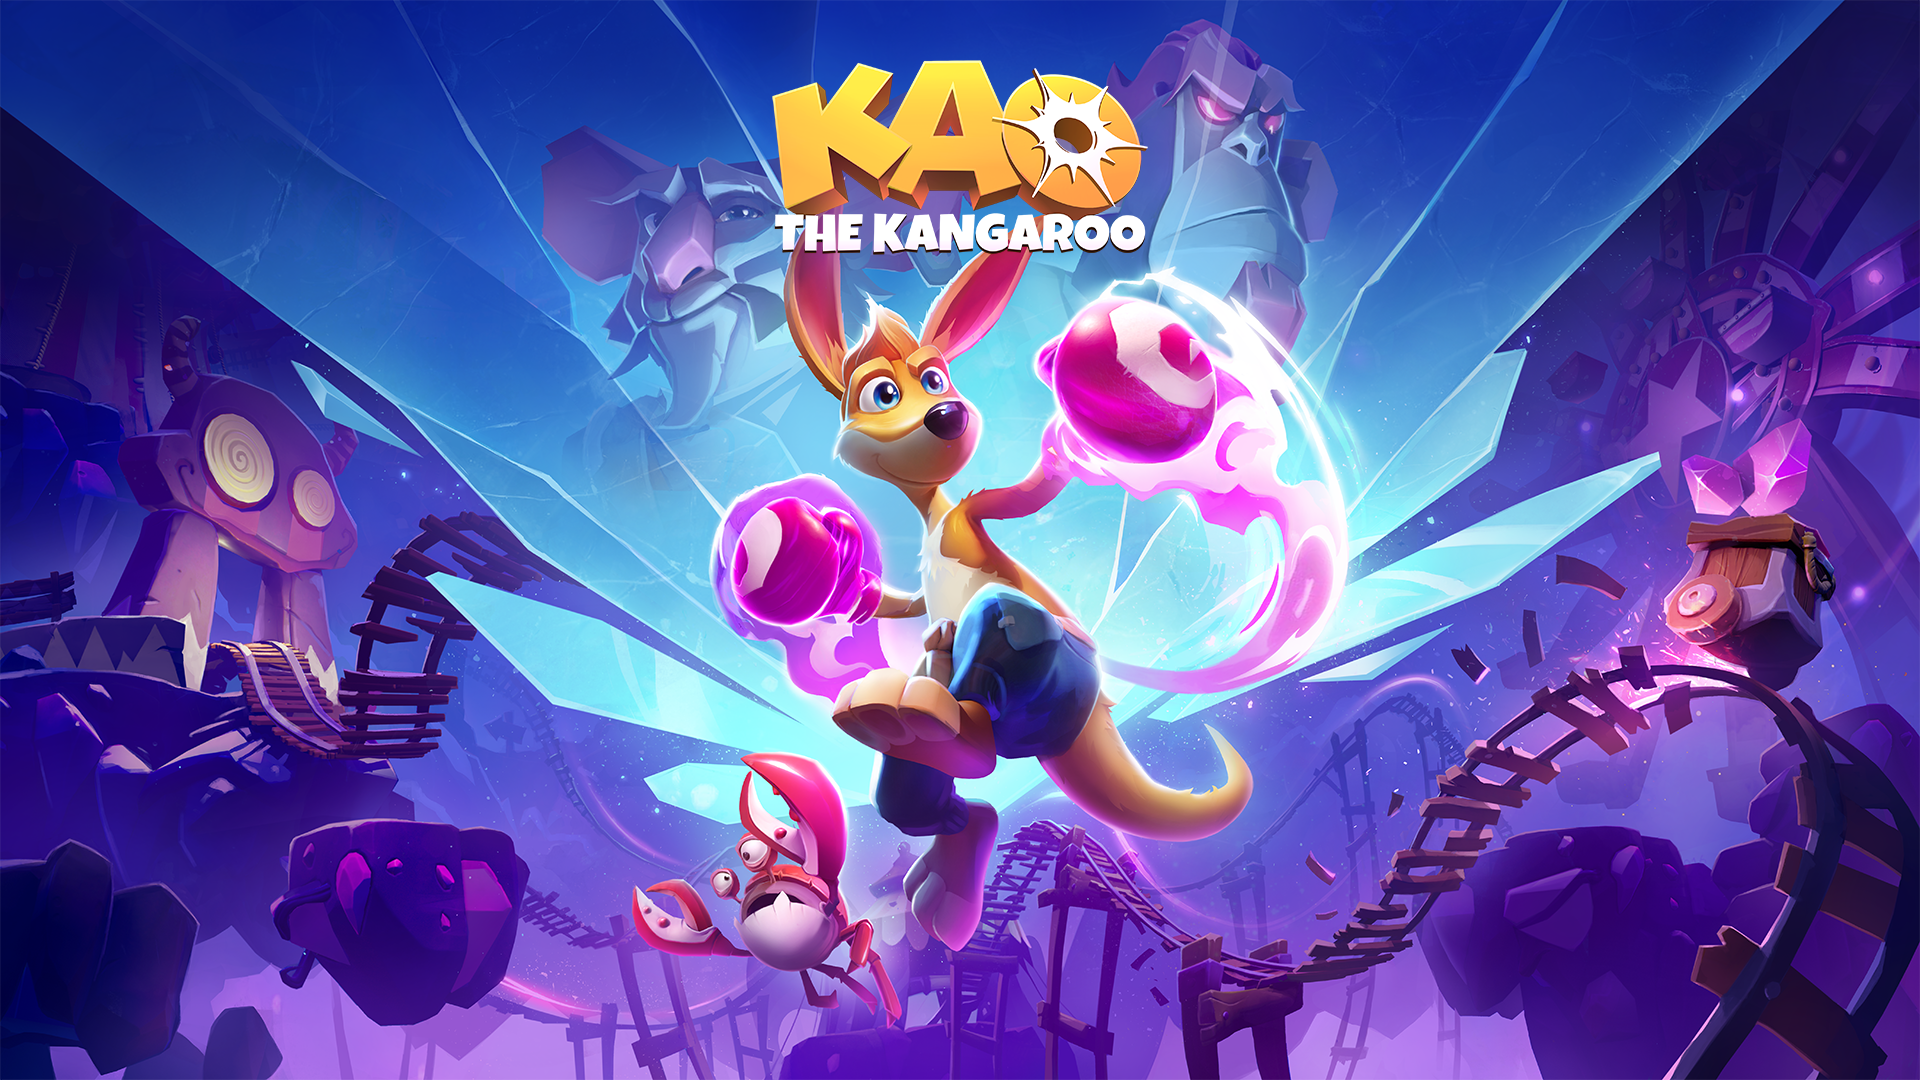 Kao The Kangaroo Trailer Showcases Friends & Family Ahead Of Launch On May 27